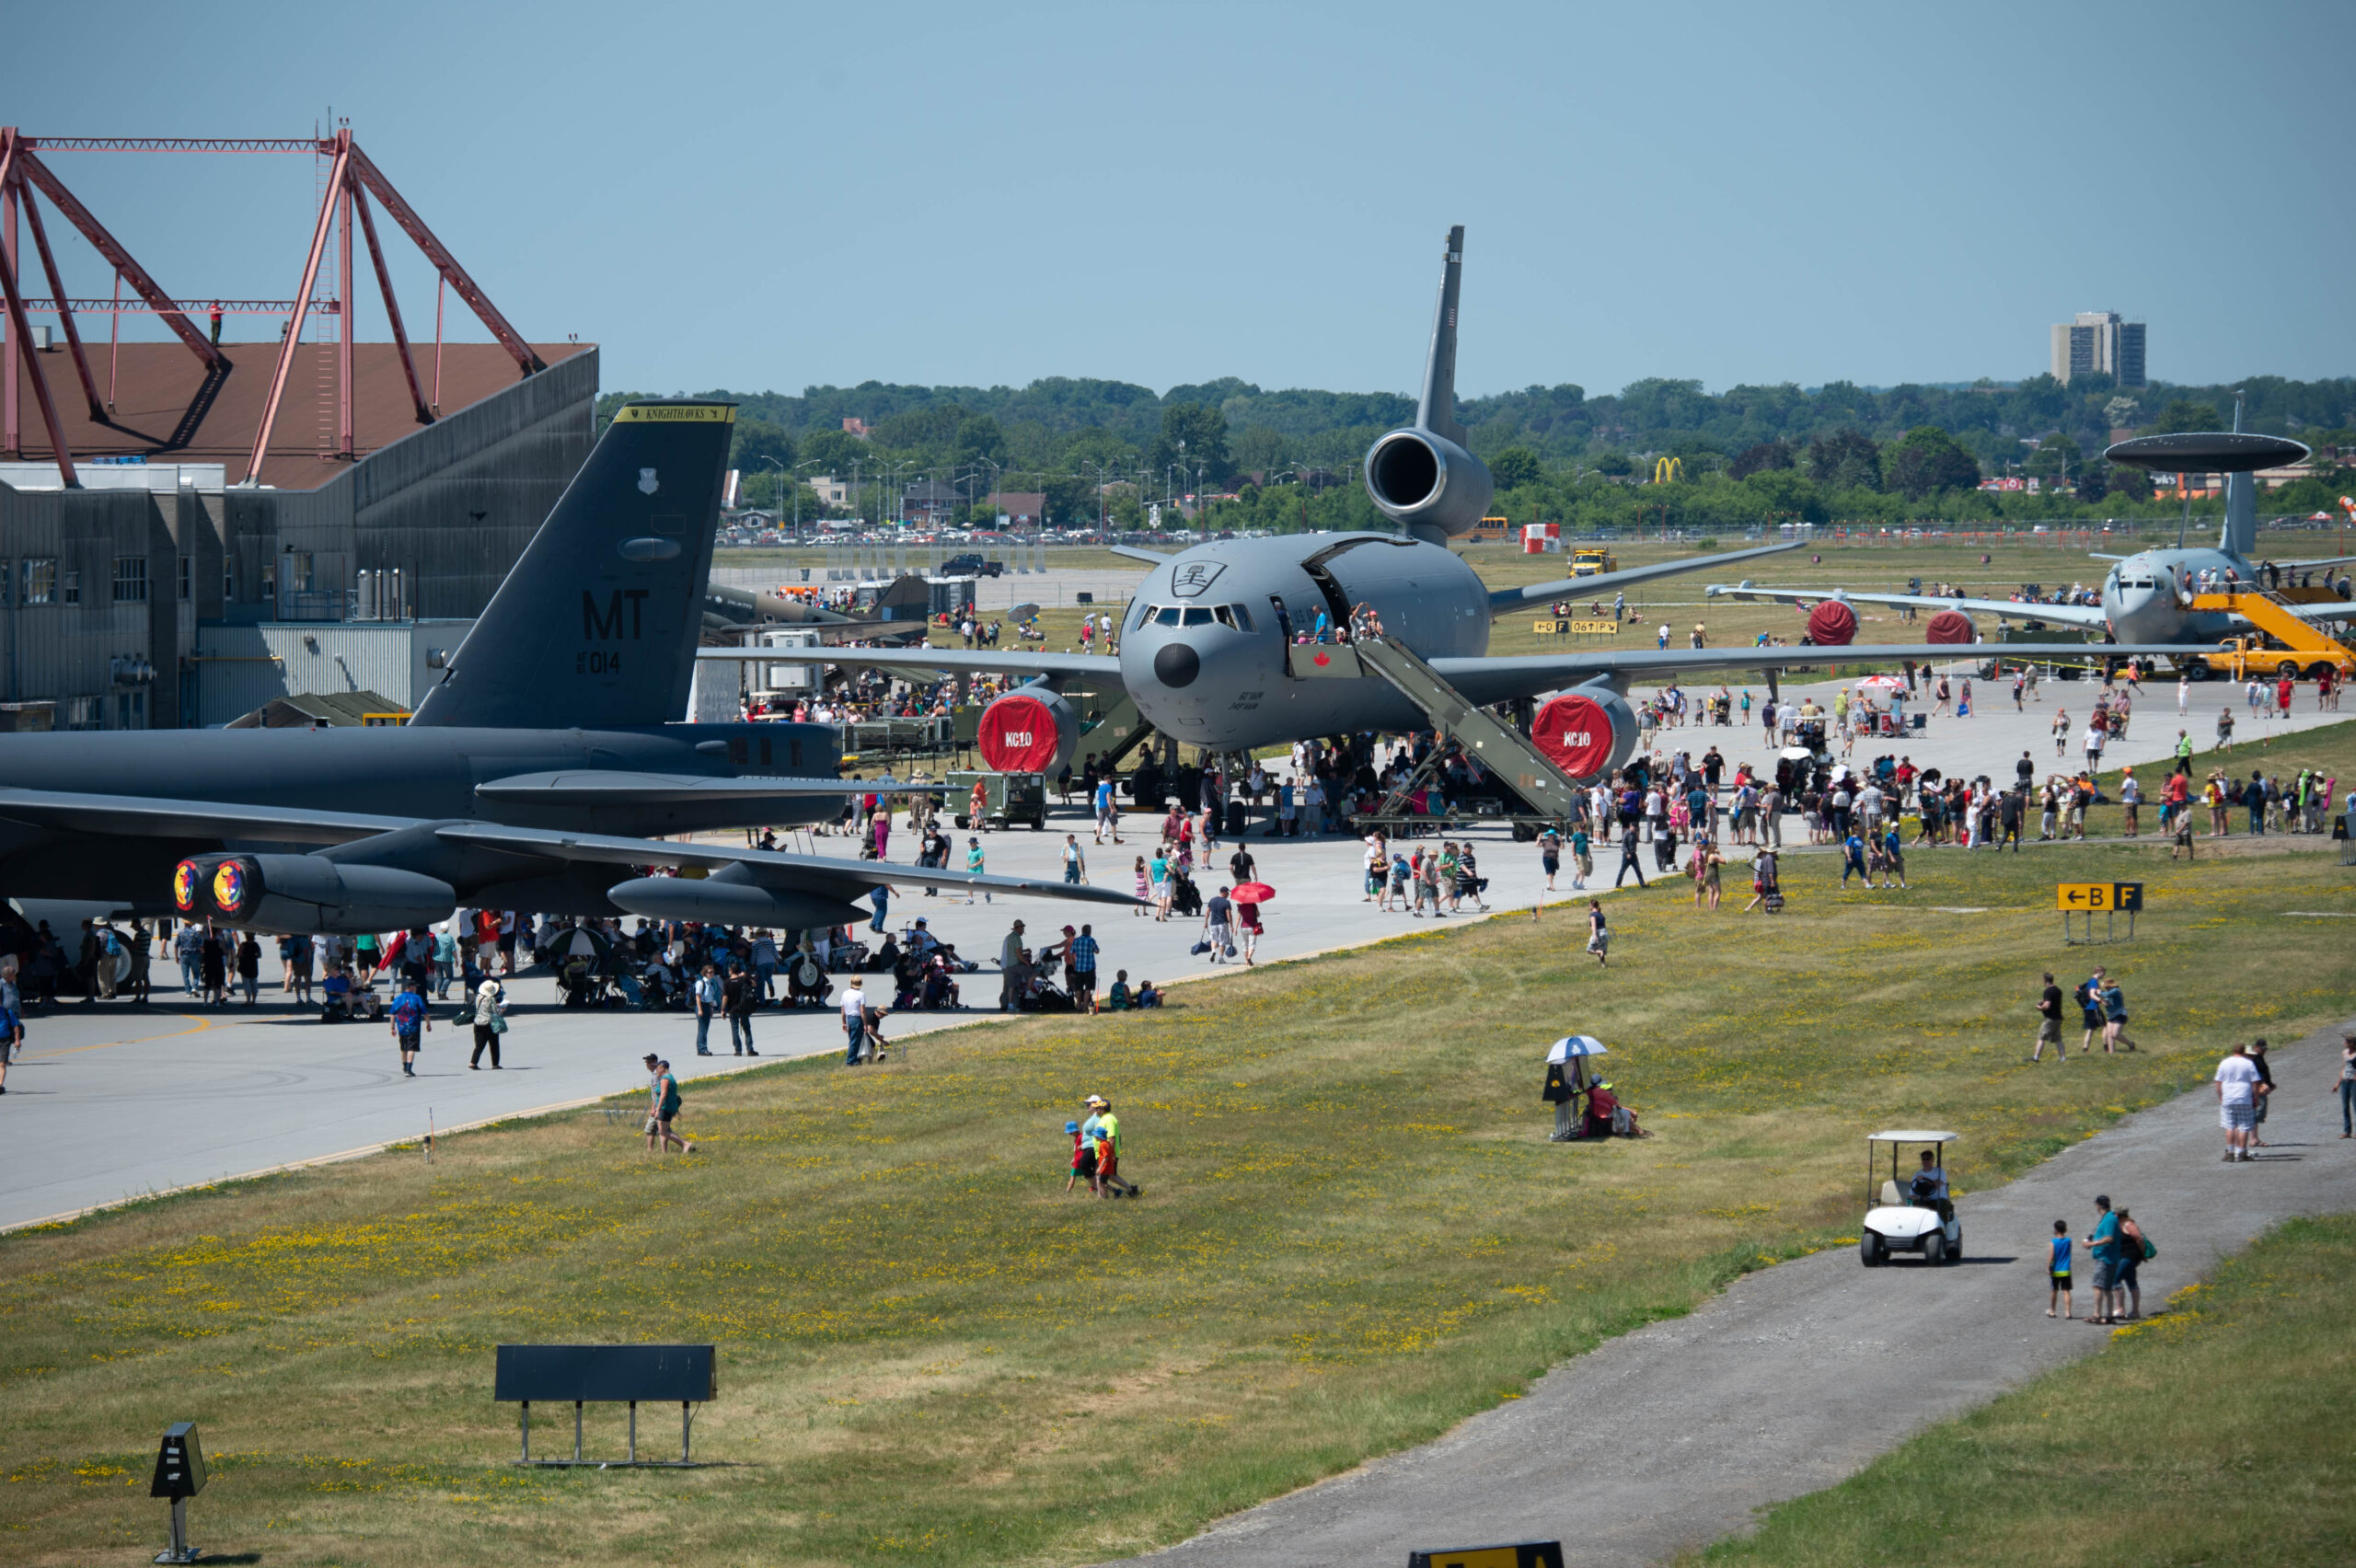 crowds gather around a large military airplane on display at an air show